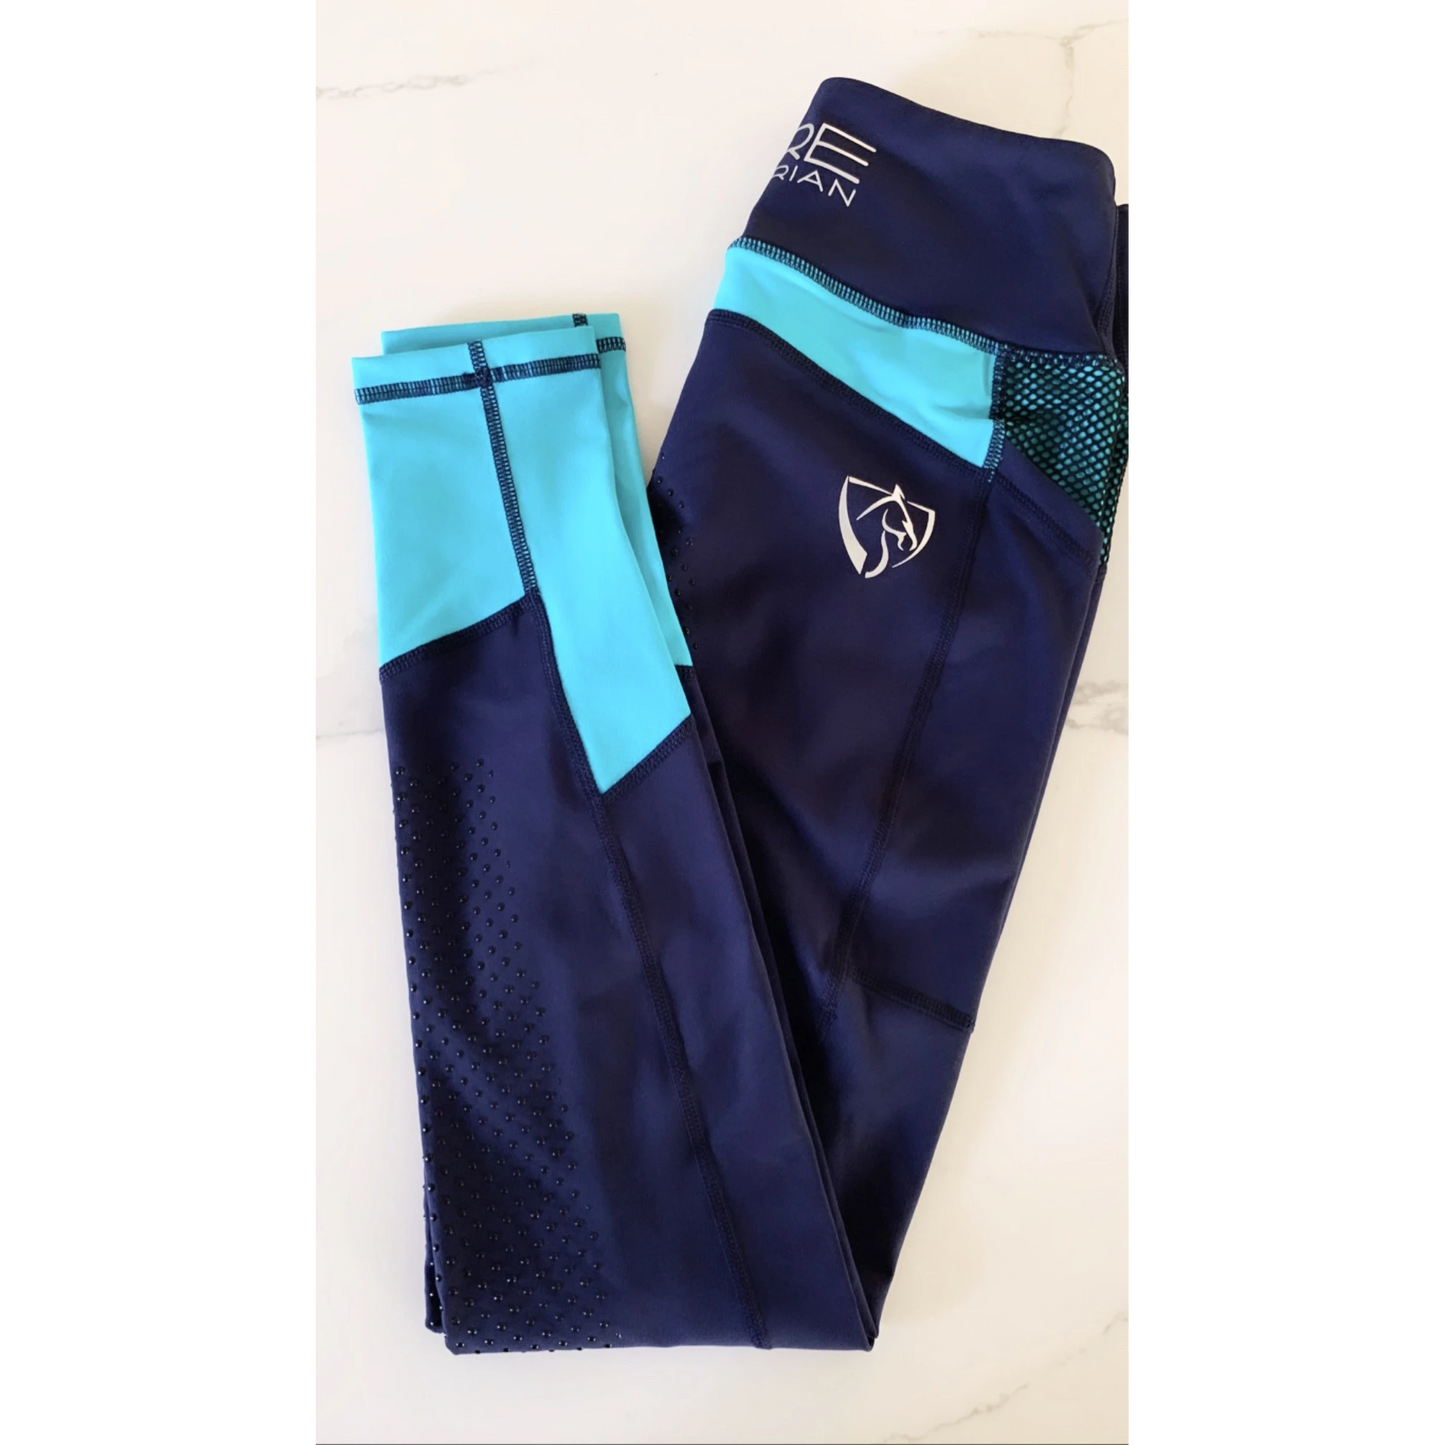 Navy and turquoise horse riding tights with patterned knee patches.